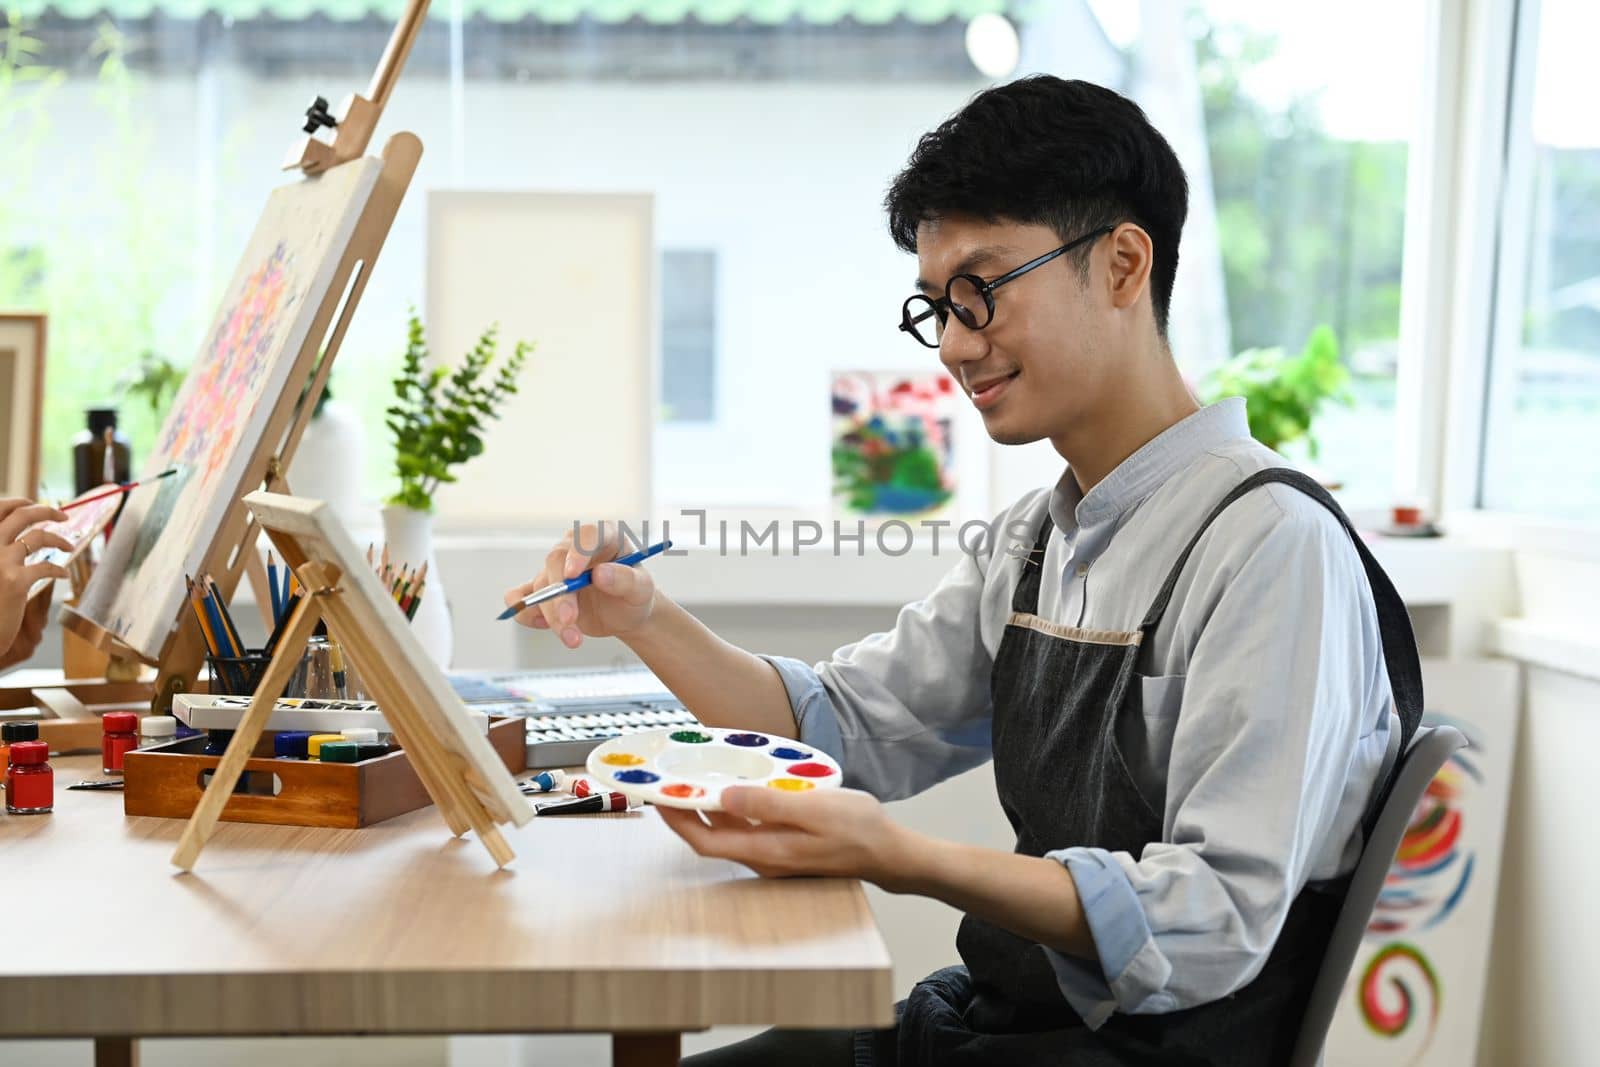 Smiling asian man student in apron painting in watercolor on easel. Art, creative hobby and leisure activity concept.